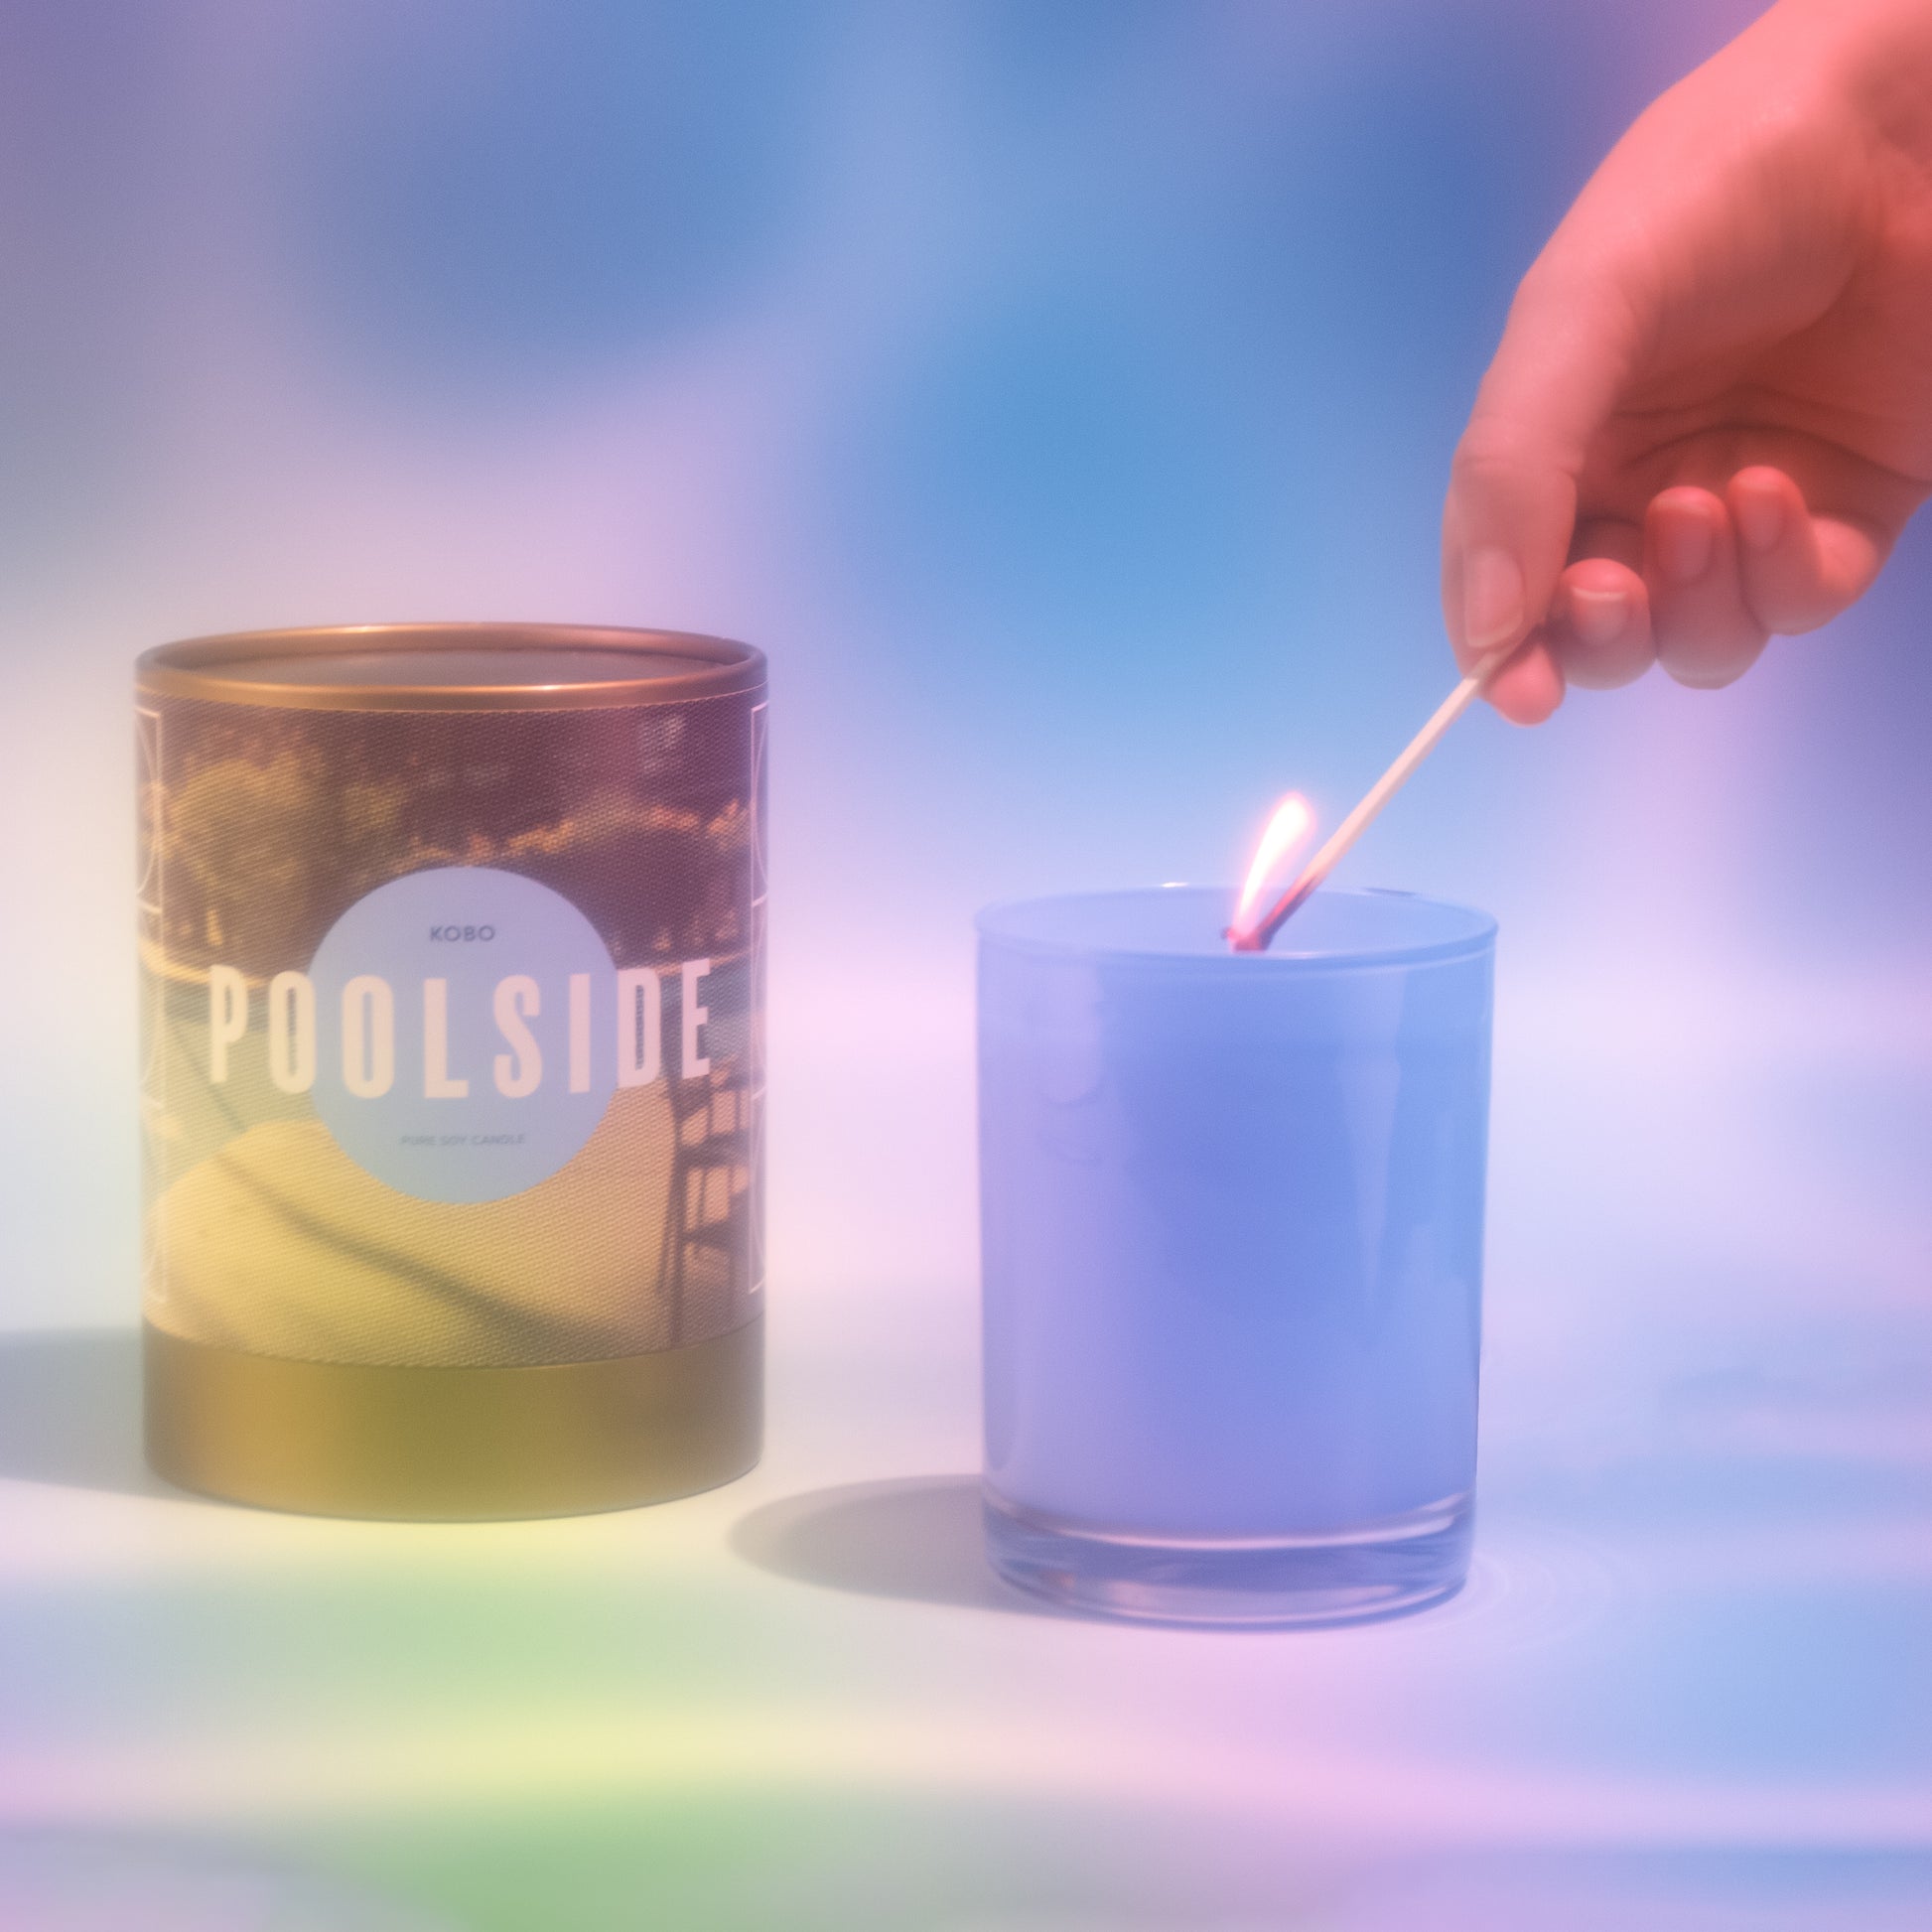 Alternate Image of Poolside Road Trip 11 oz. Pure Soy Candle